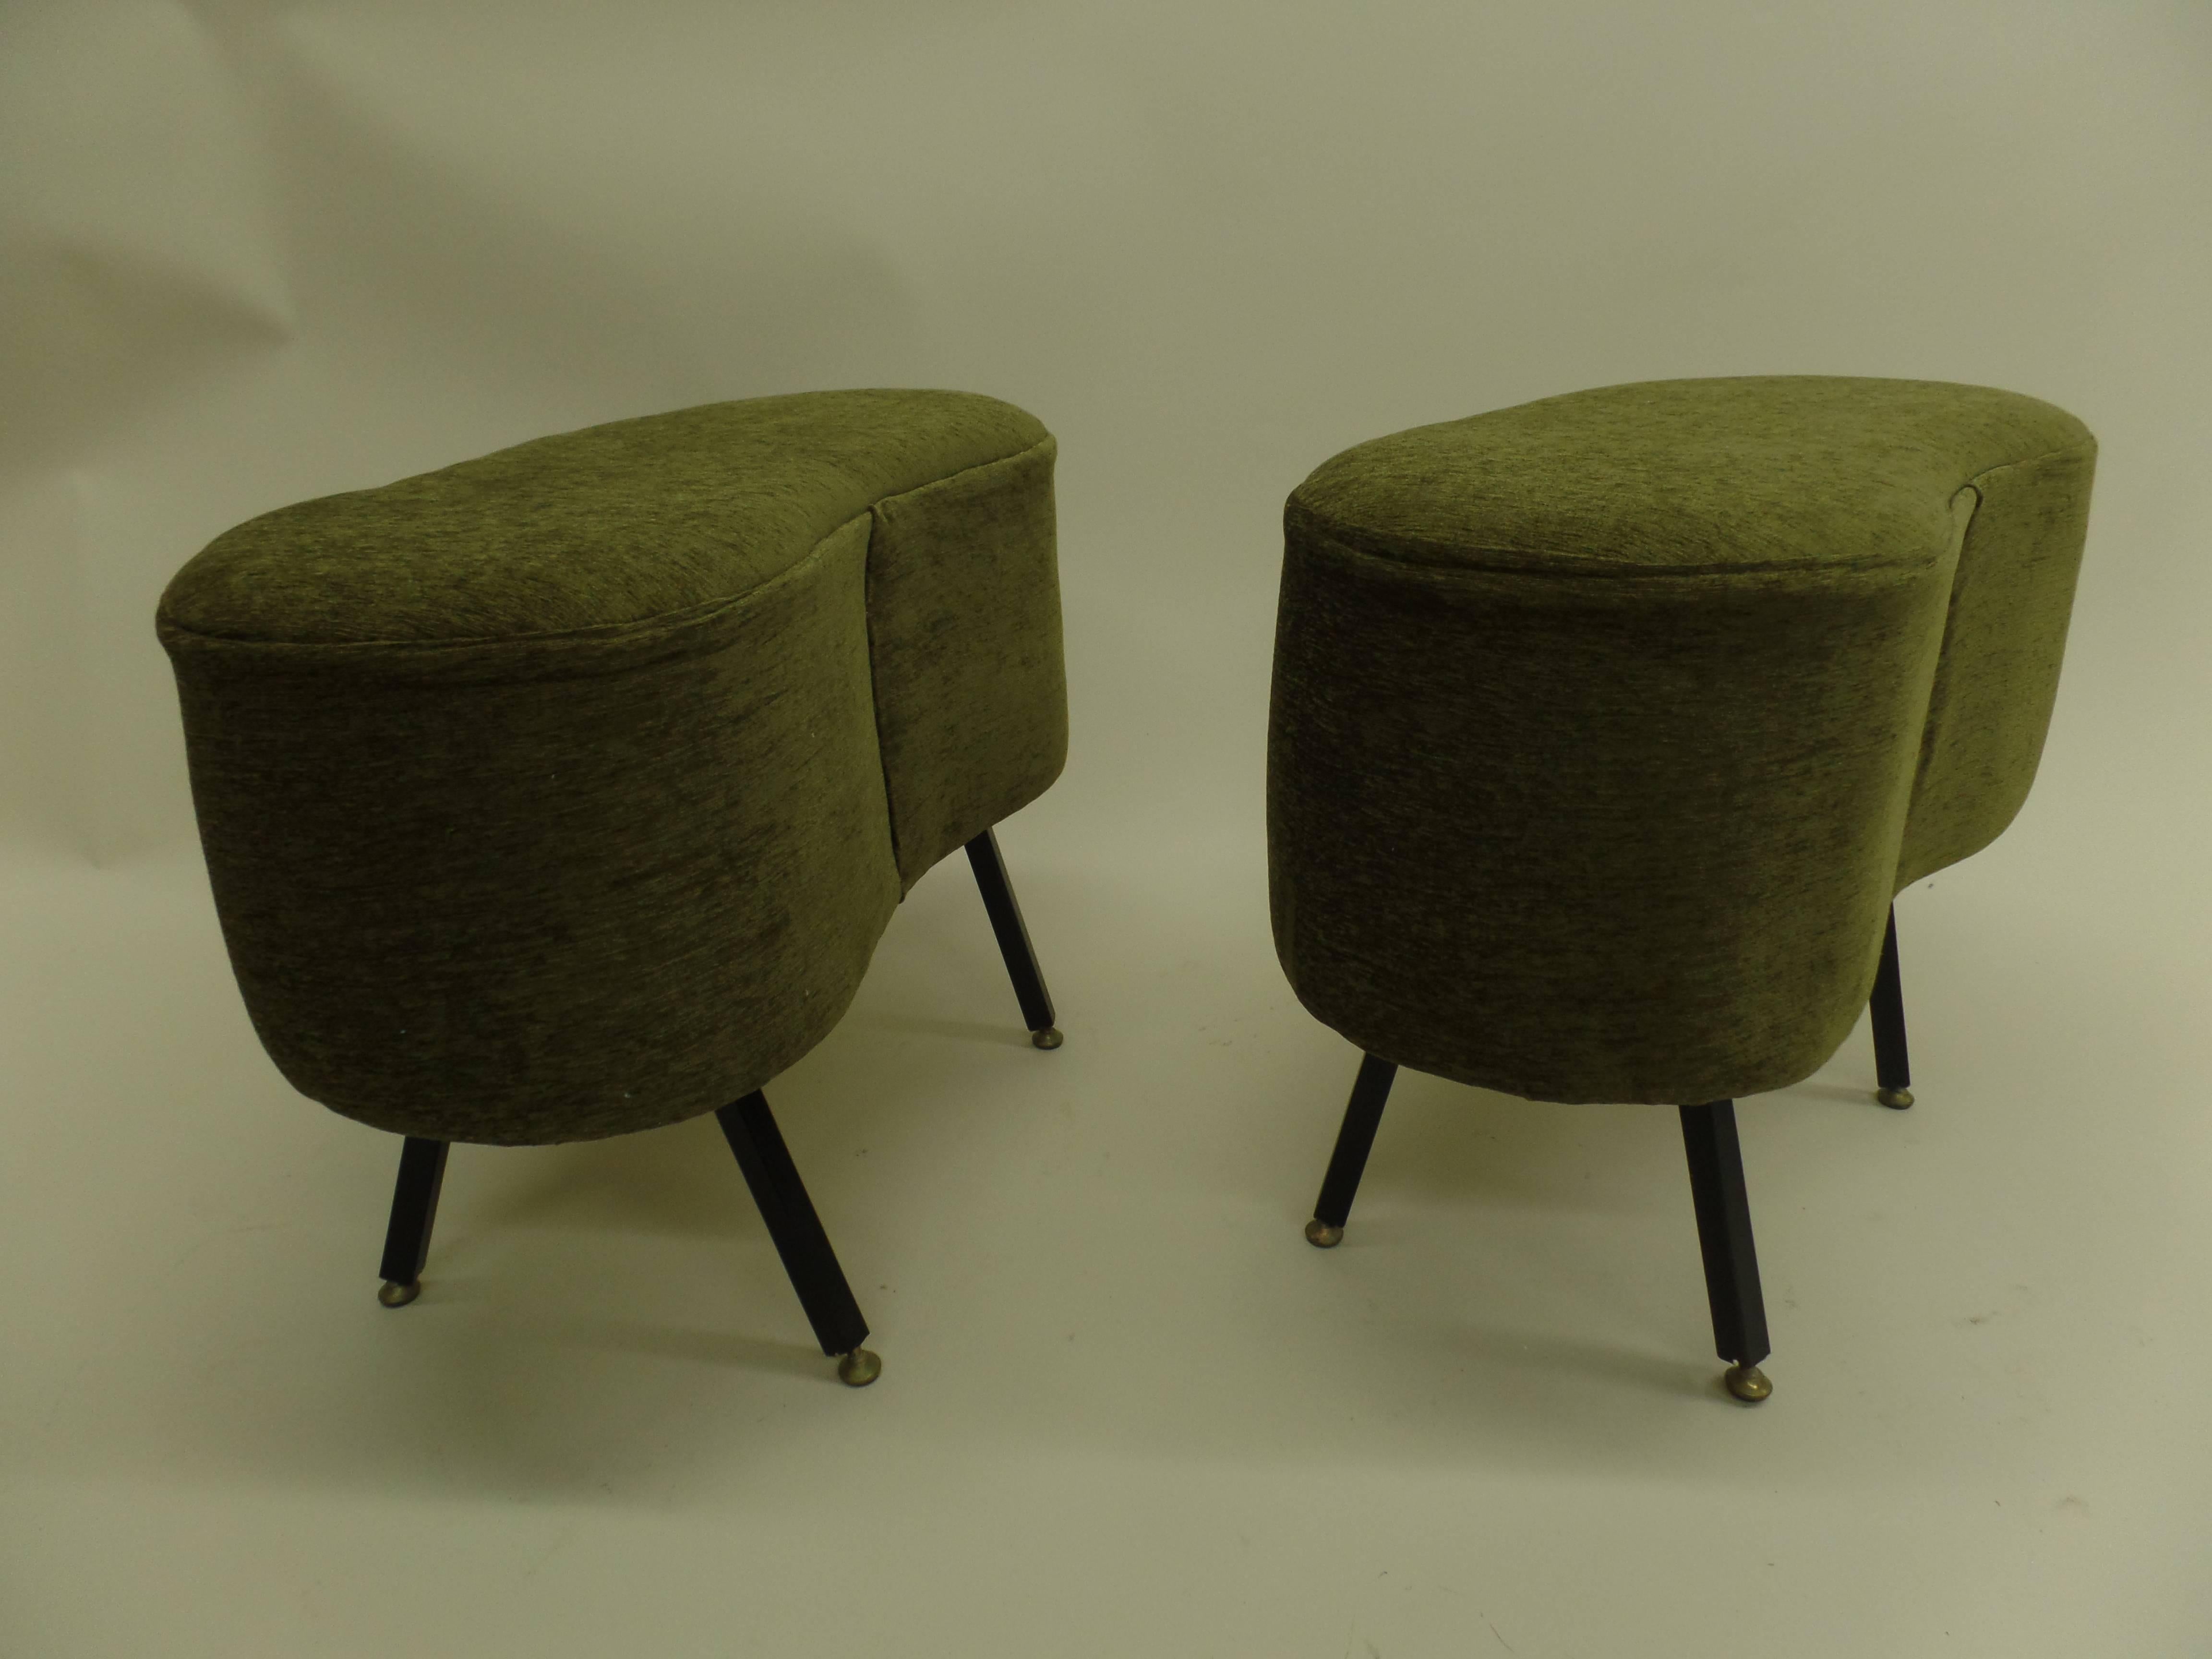 Pair of Italian benches/stools/ottomans/poufs with elegant organic forms and angled legs. This organic modern style with clean bold lines was popularized by Marco Zanuso in Italy.